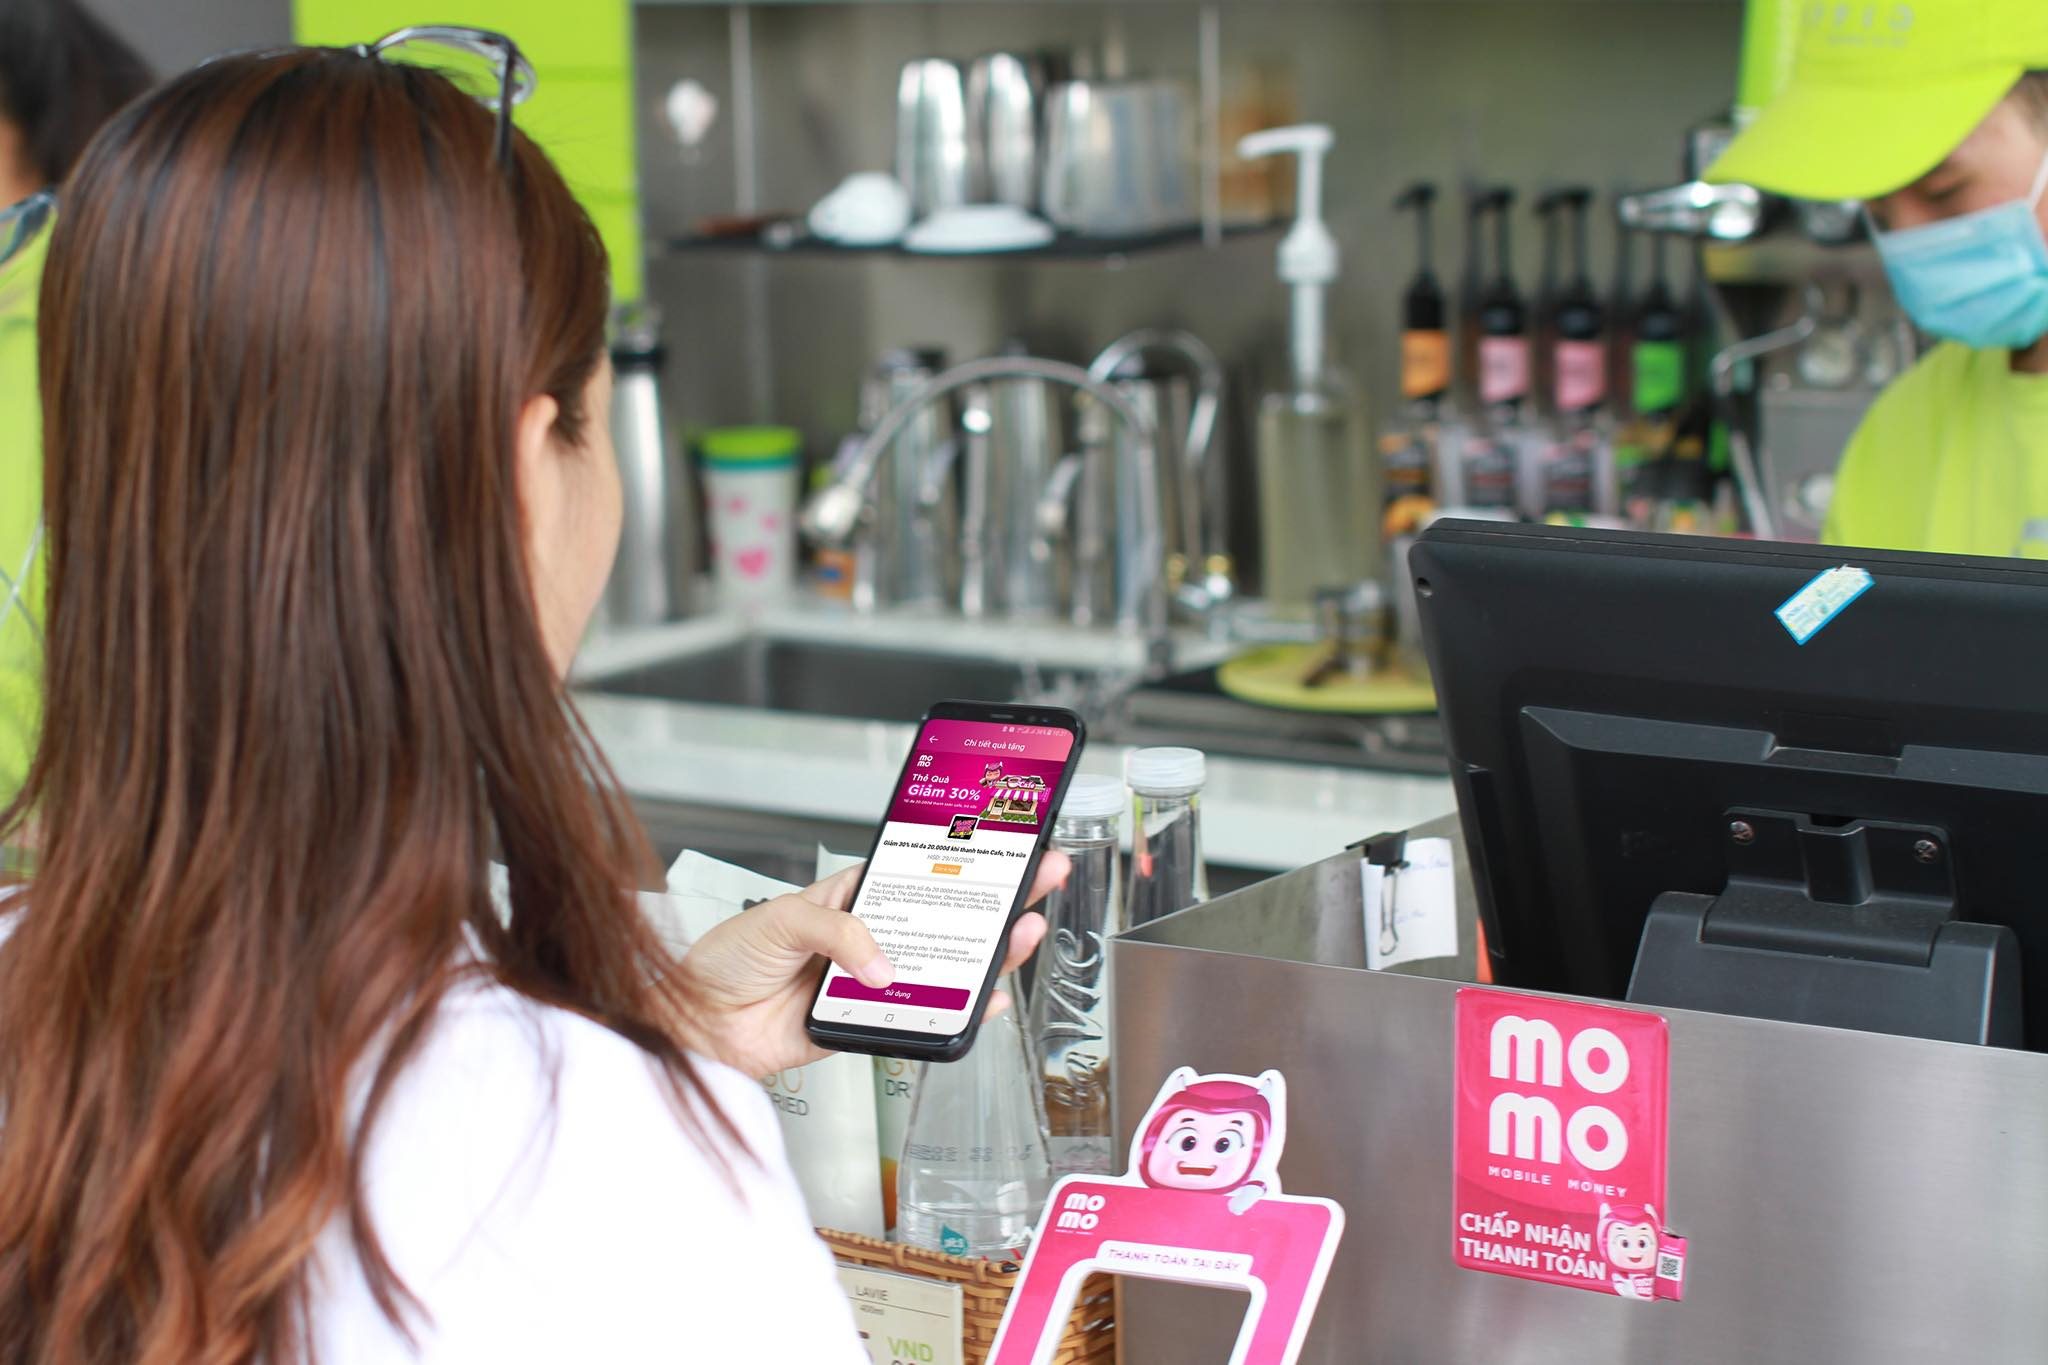 After doubling its user base in a year, Vietnamese e-wallet MoMo still sees room for growth